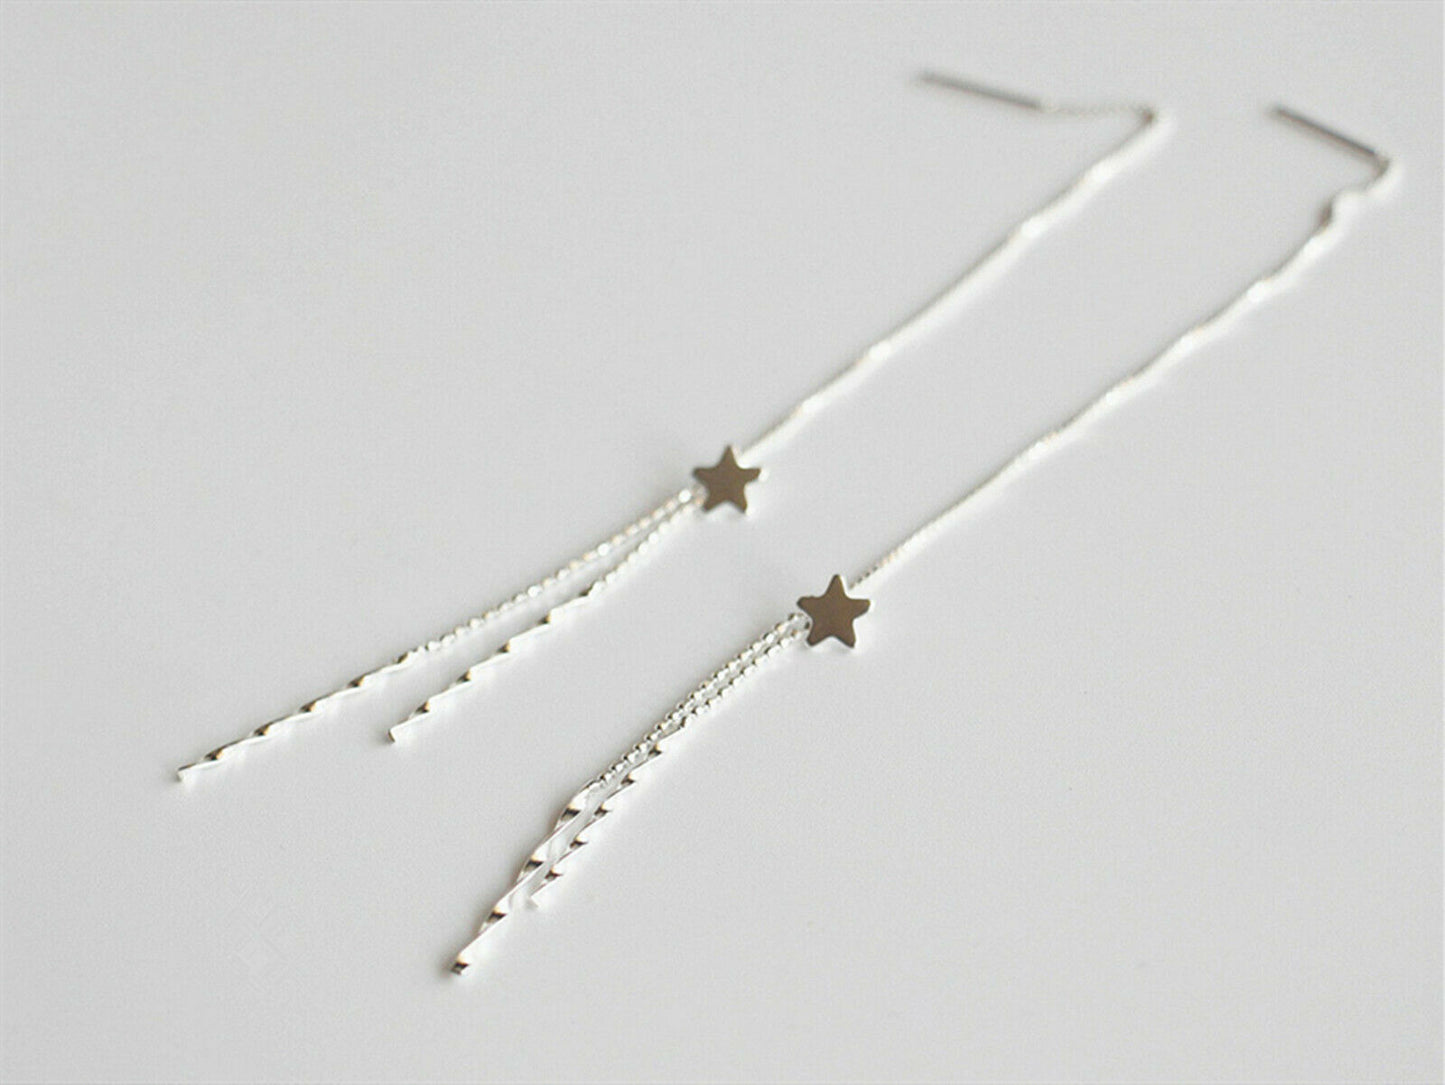 Wavy Tassel Earrings with Sterling Silver Star Beads and Pull-Through Threader Backs - sugarkittenlondon